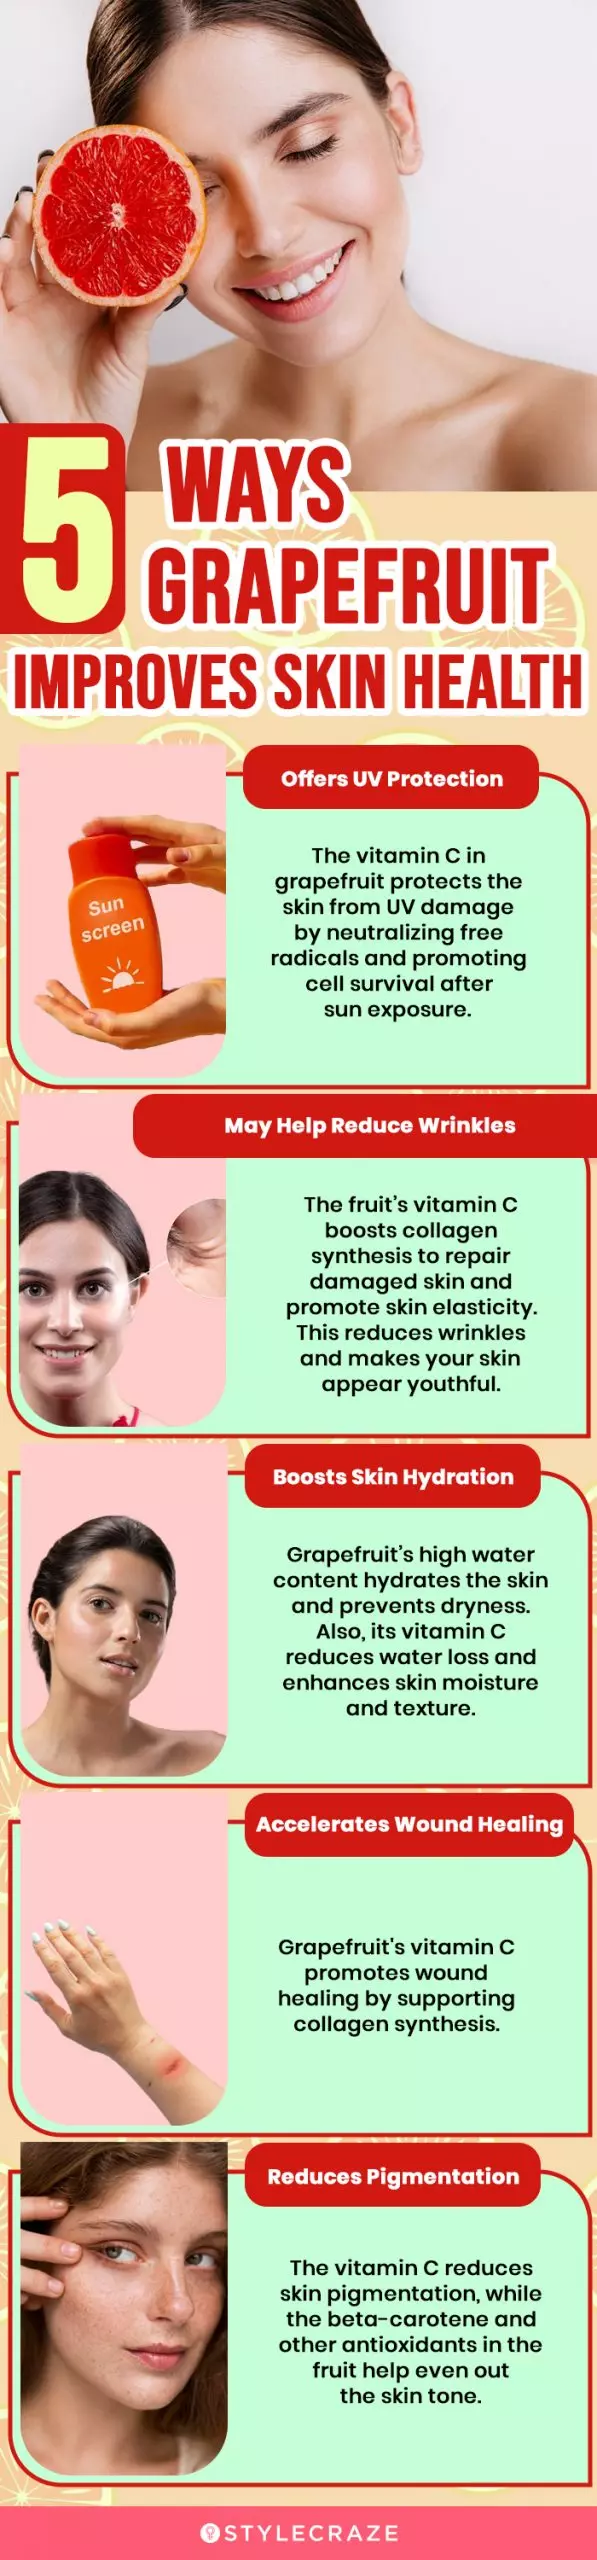 5 grapefruit benefits for the skin (infographic)